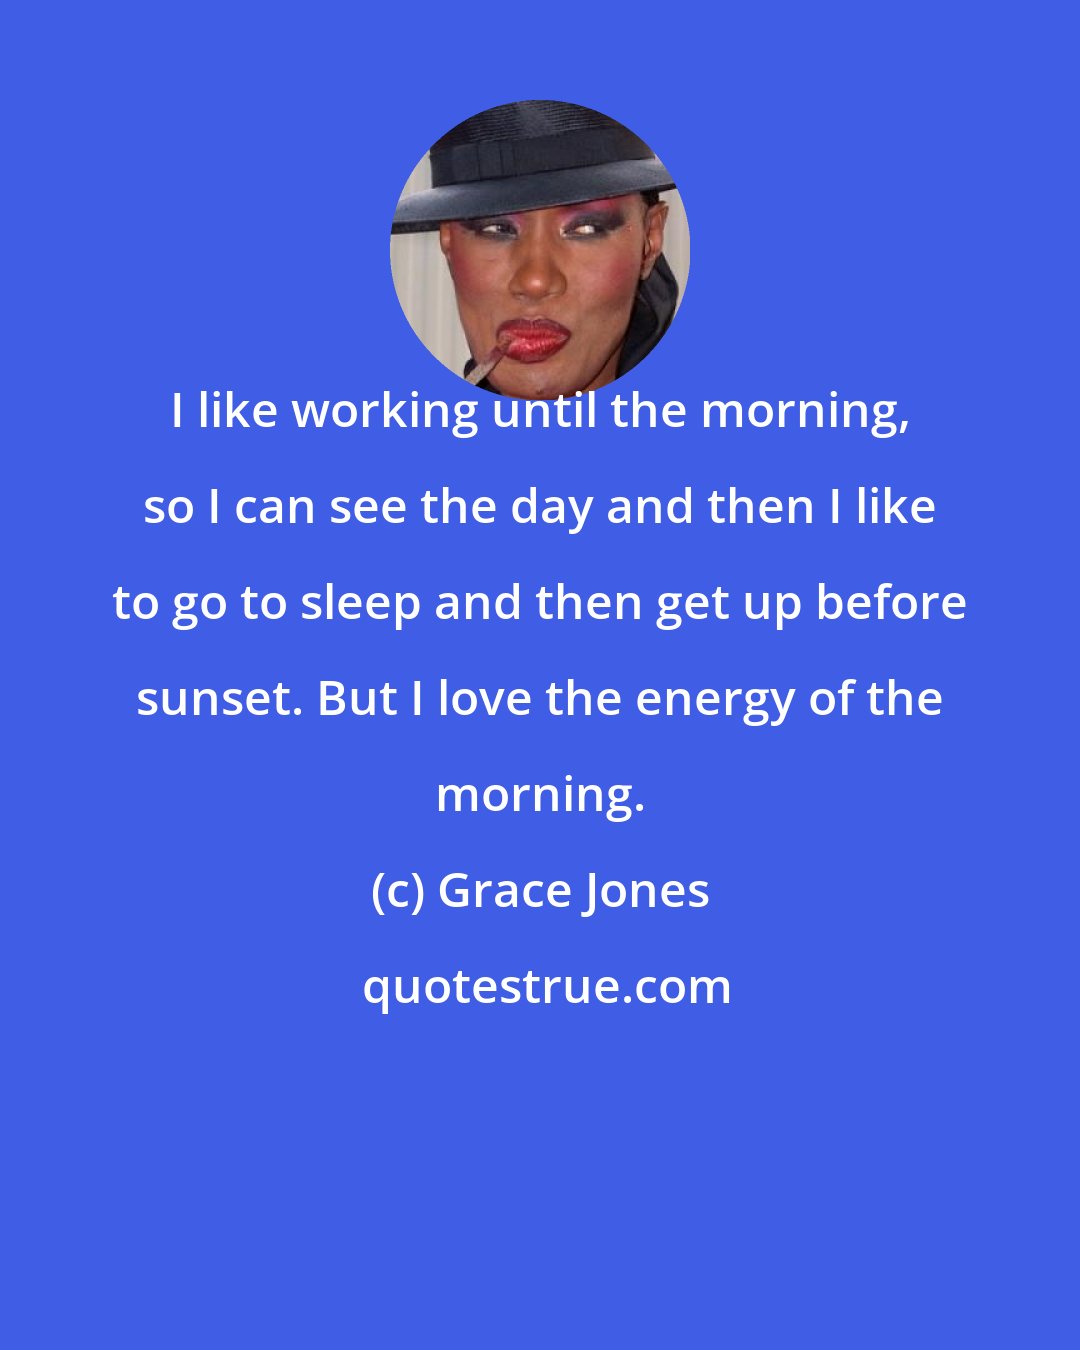 Grace Jones: I like working until the morning, so I can see the day and then I like to go to sleep and then get up before sunset. But I love the energy of the morning.